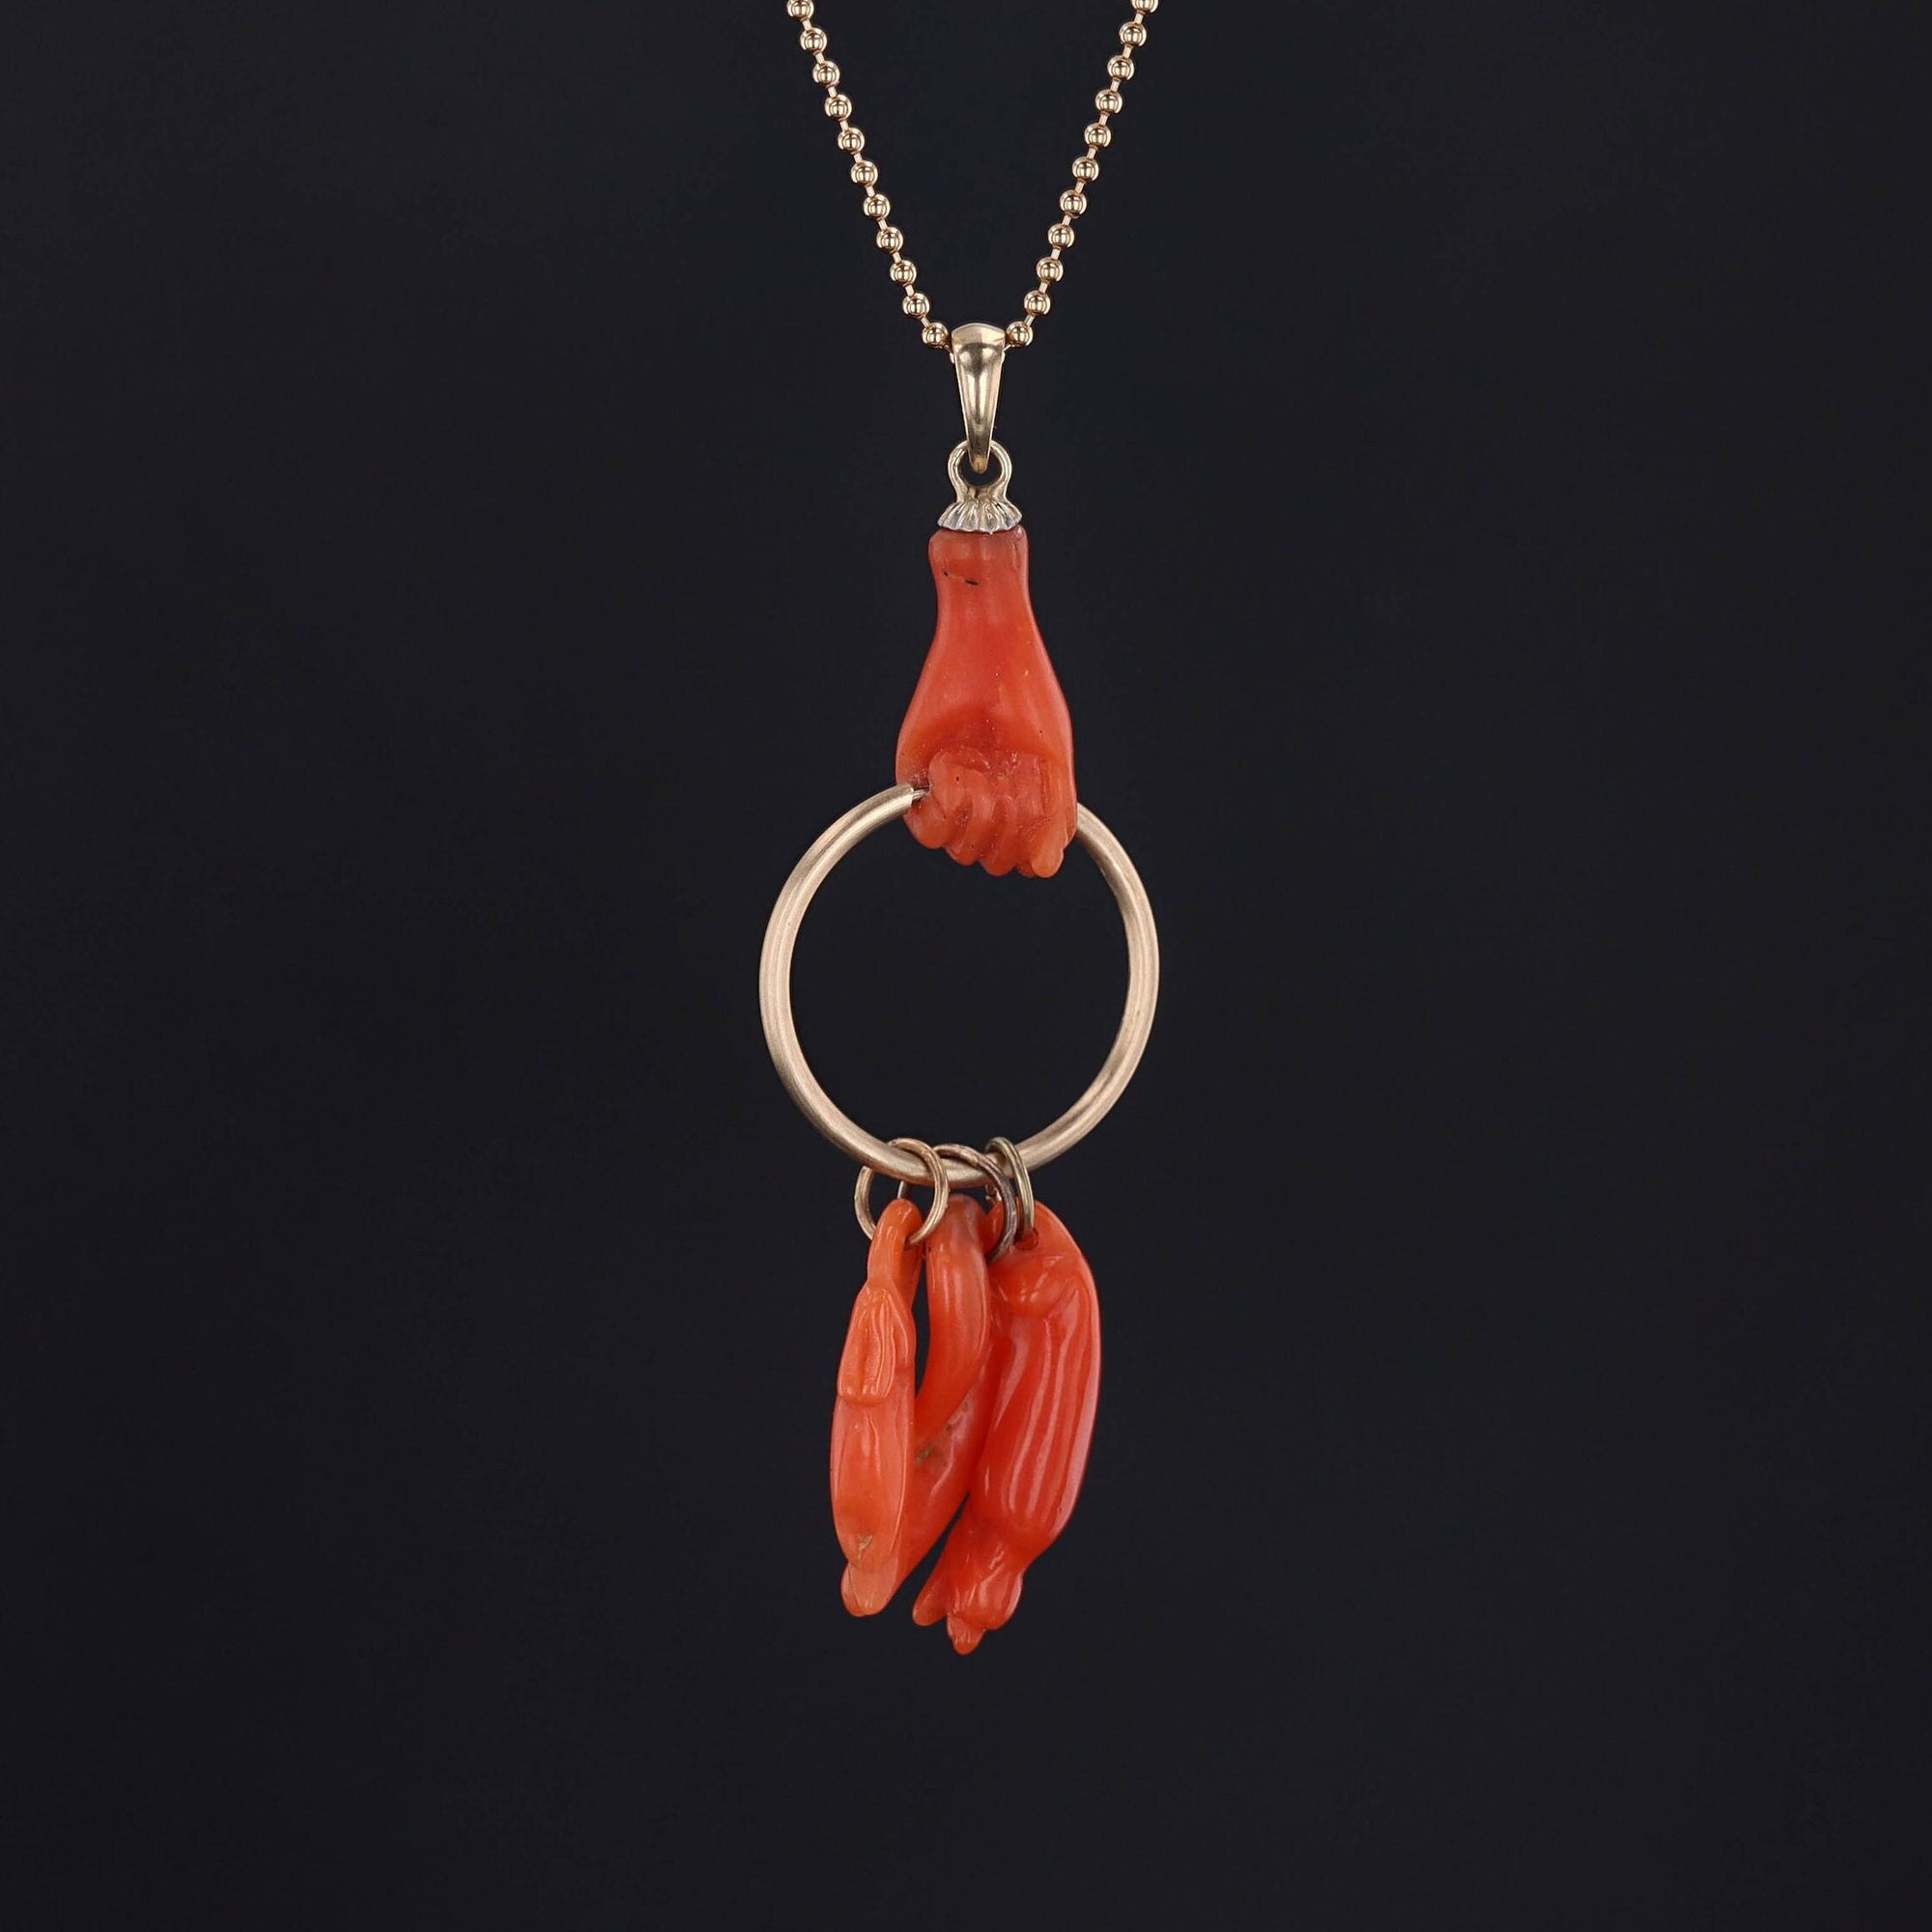 Antique Coral Figa Hand Charm Necklace | 14k Gold & Coral Pendant with Optional 14k Gold Chain